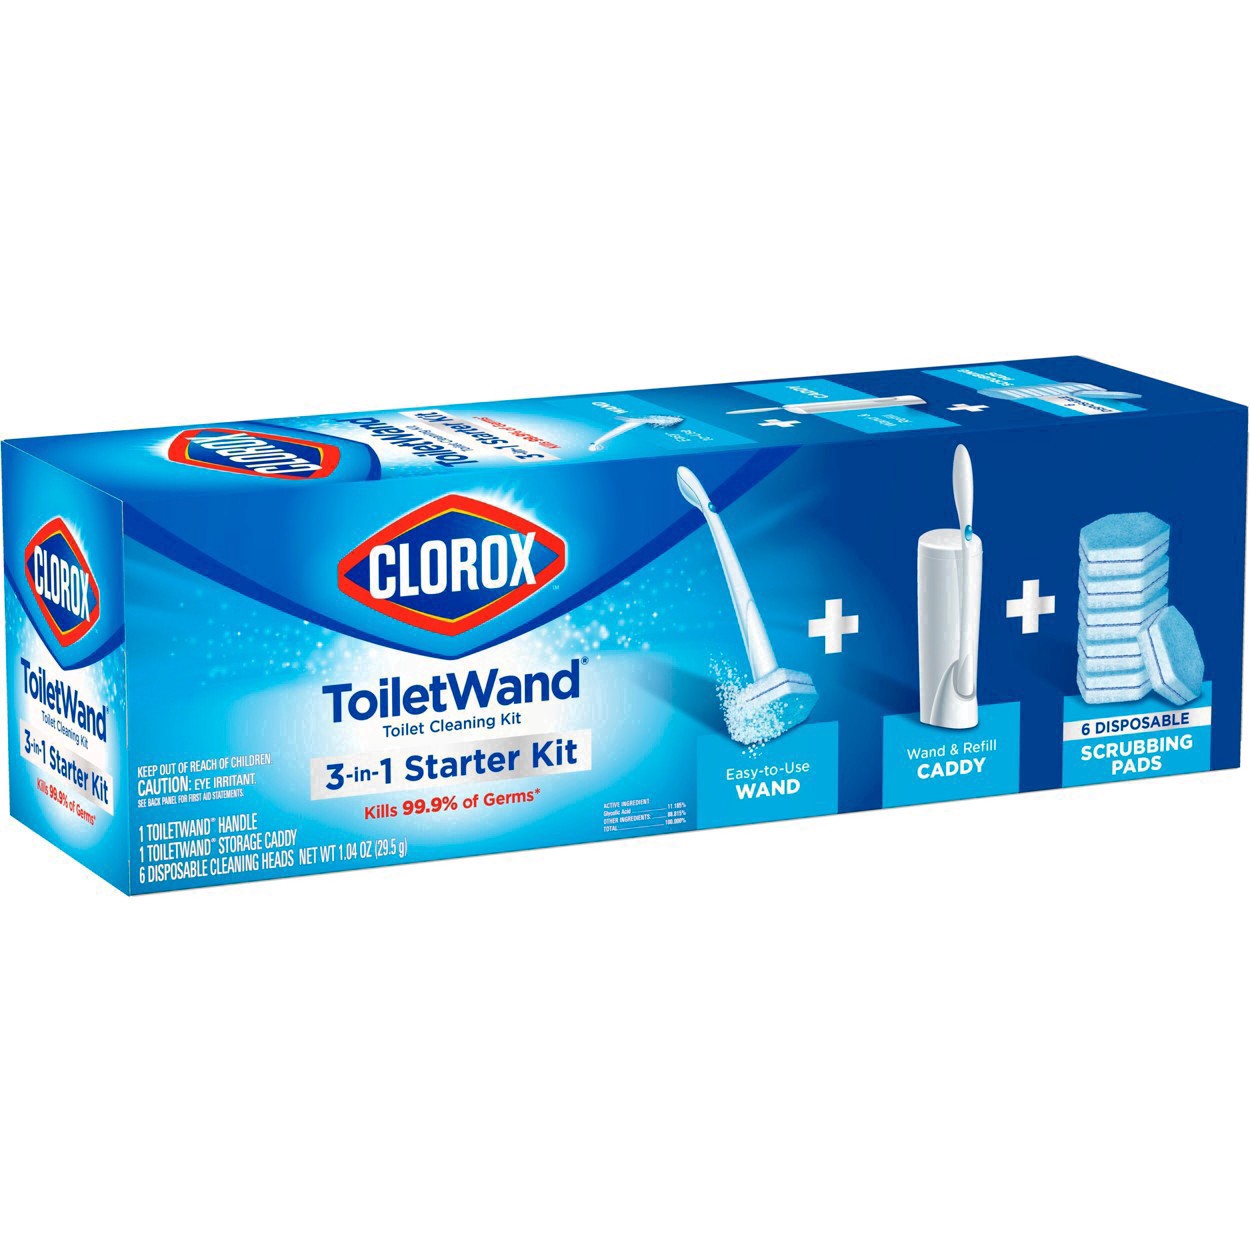 slide 115 of 176, Clorox Toilet Wand 3-in-1 Starter Toliet Cleaning Kit, 1 ct